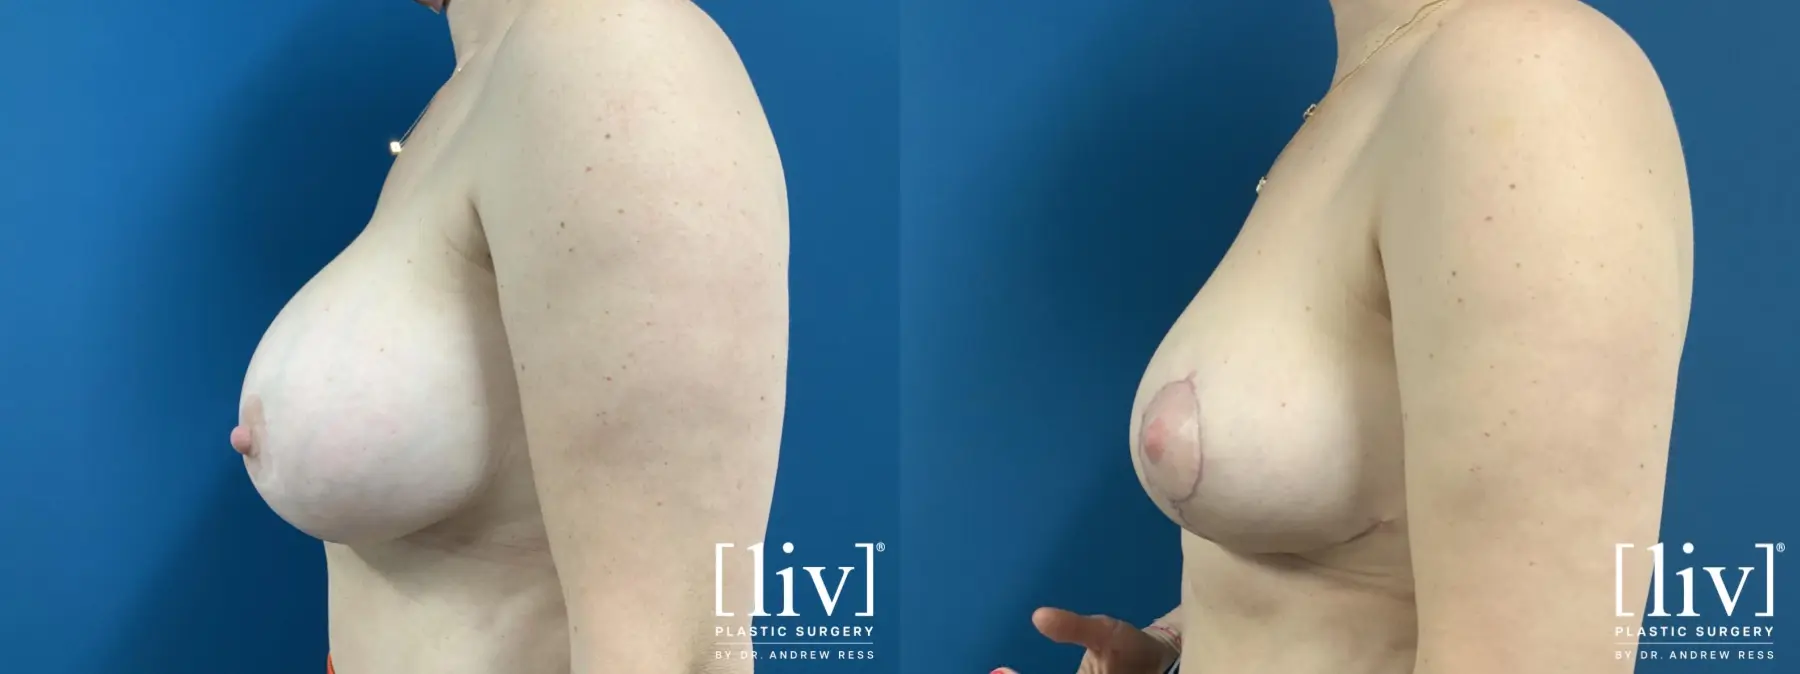 Implant removal with Breast Lift and Fat Transfer to Breast  - Before and After 3